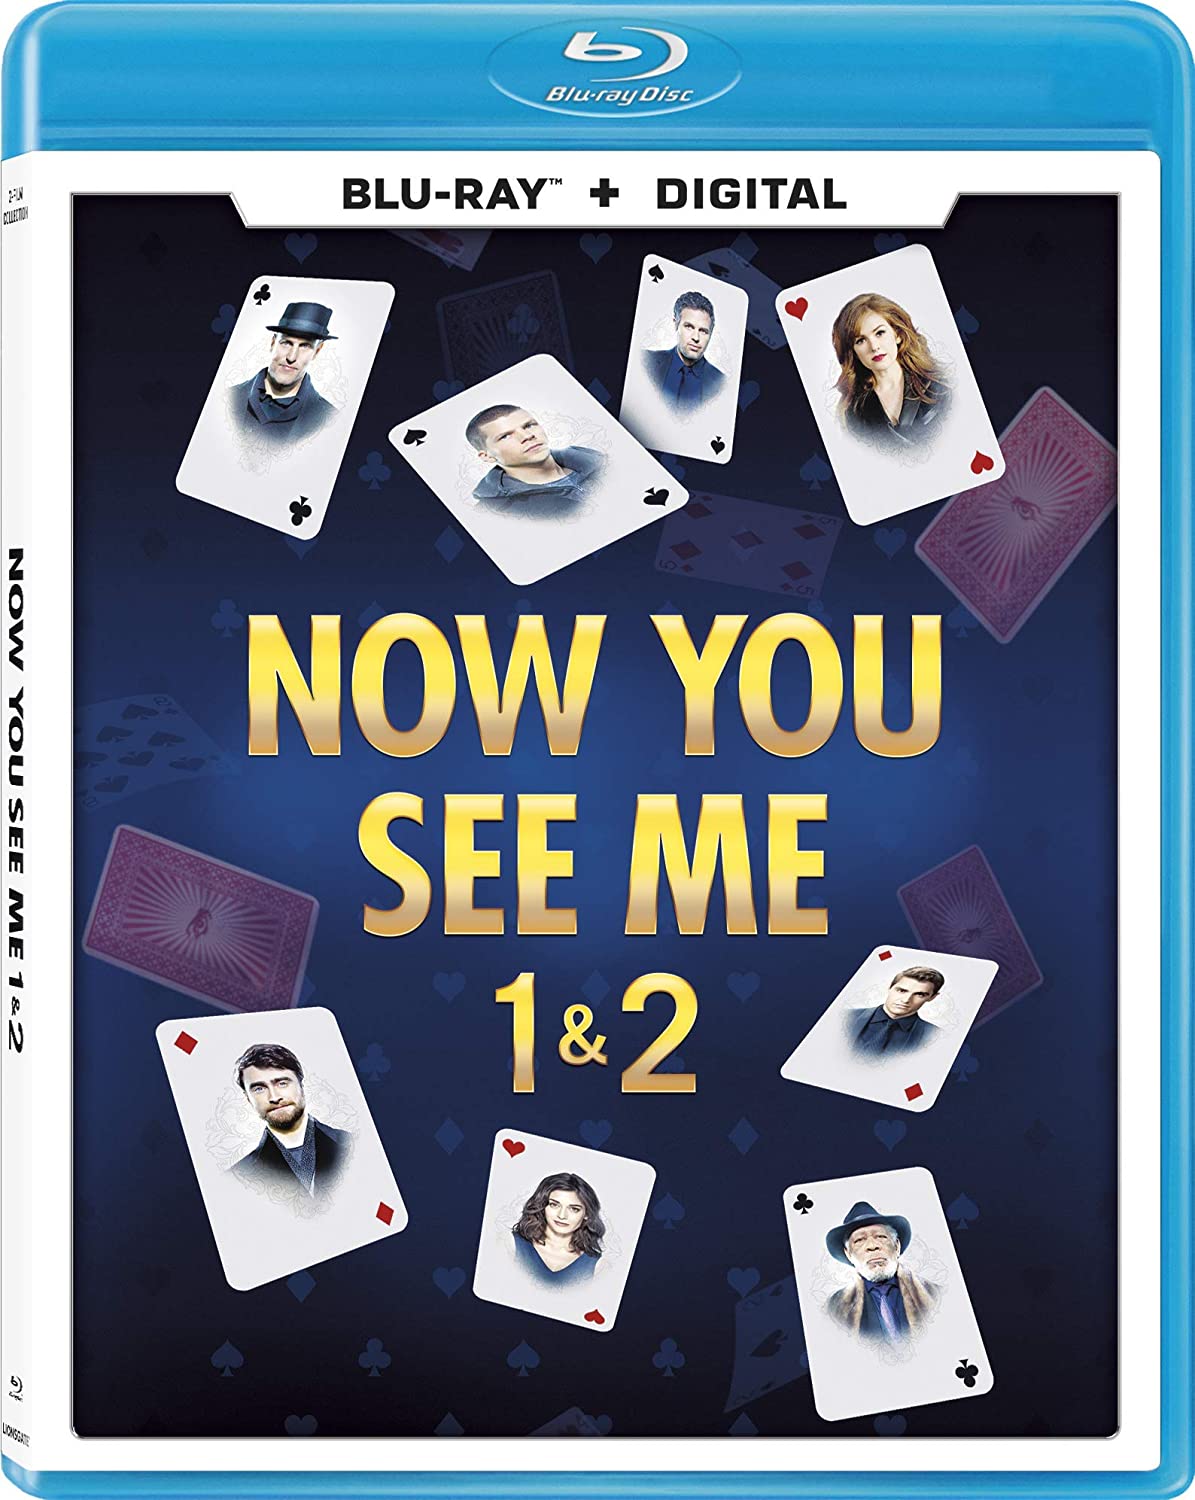 Now You See Me Double Feature (Blu-ray + Digital) $6.66 @ Amazon